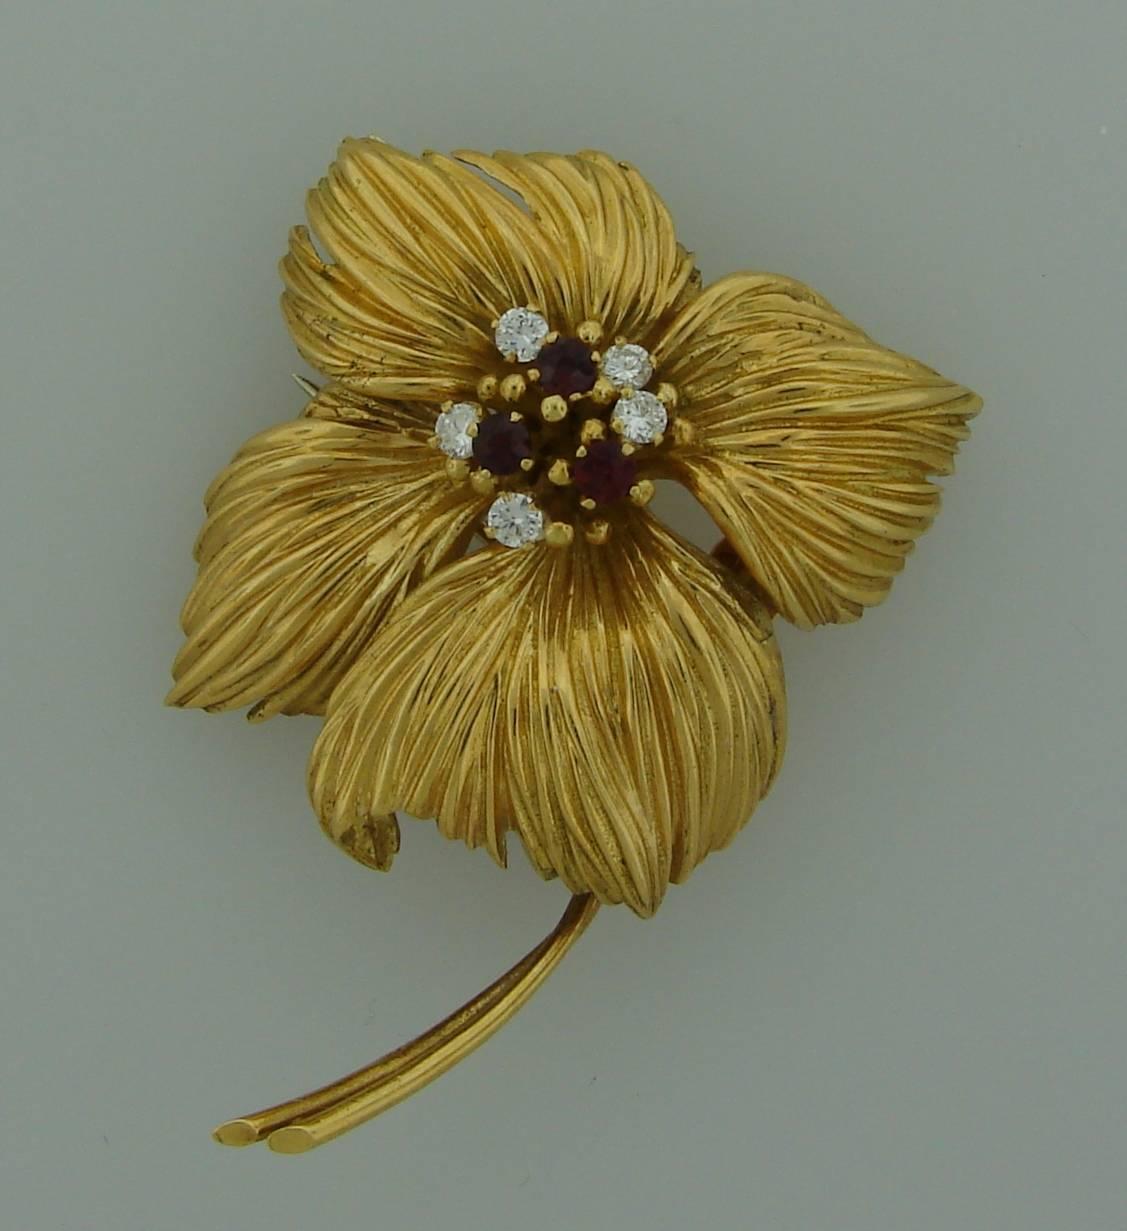 Lovely flower pin created by Van Cleef & Arpels in France in the 1950's. Made of 18k (stamped) yellow gold and accented with five round diamonds and three round rubies. Diamond total weight is approximately 0.35 carat and ruby total weight is